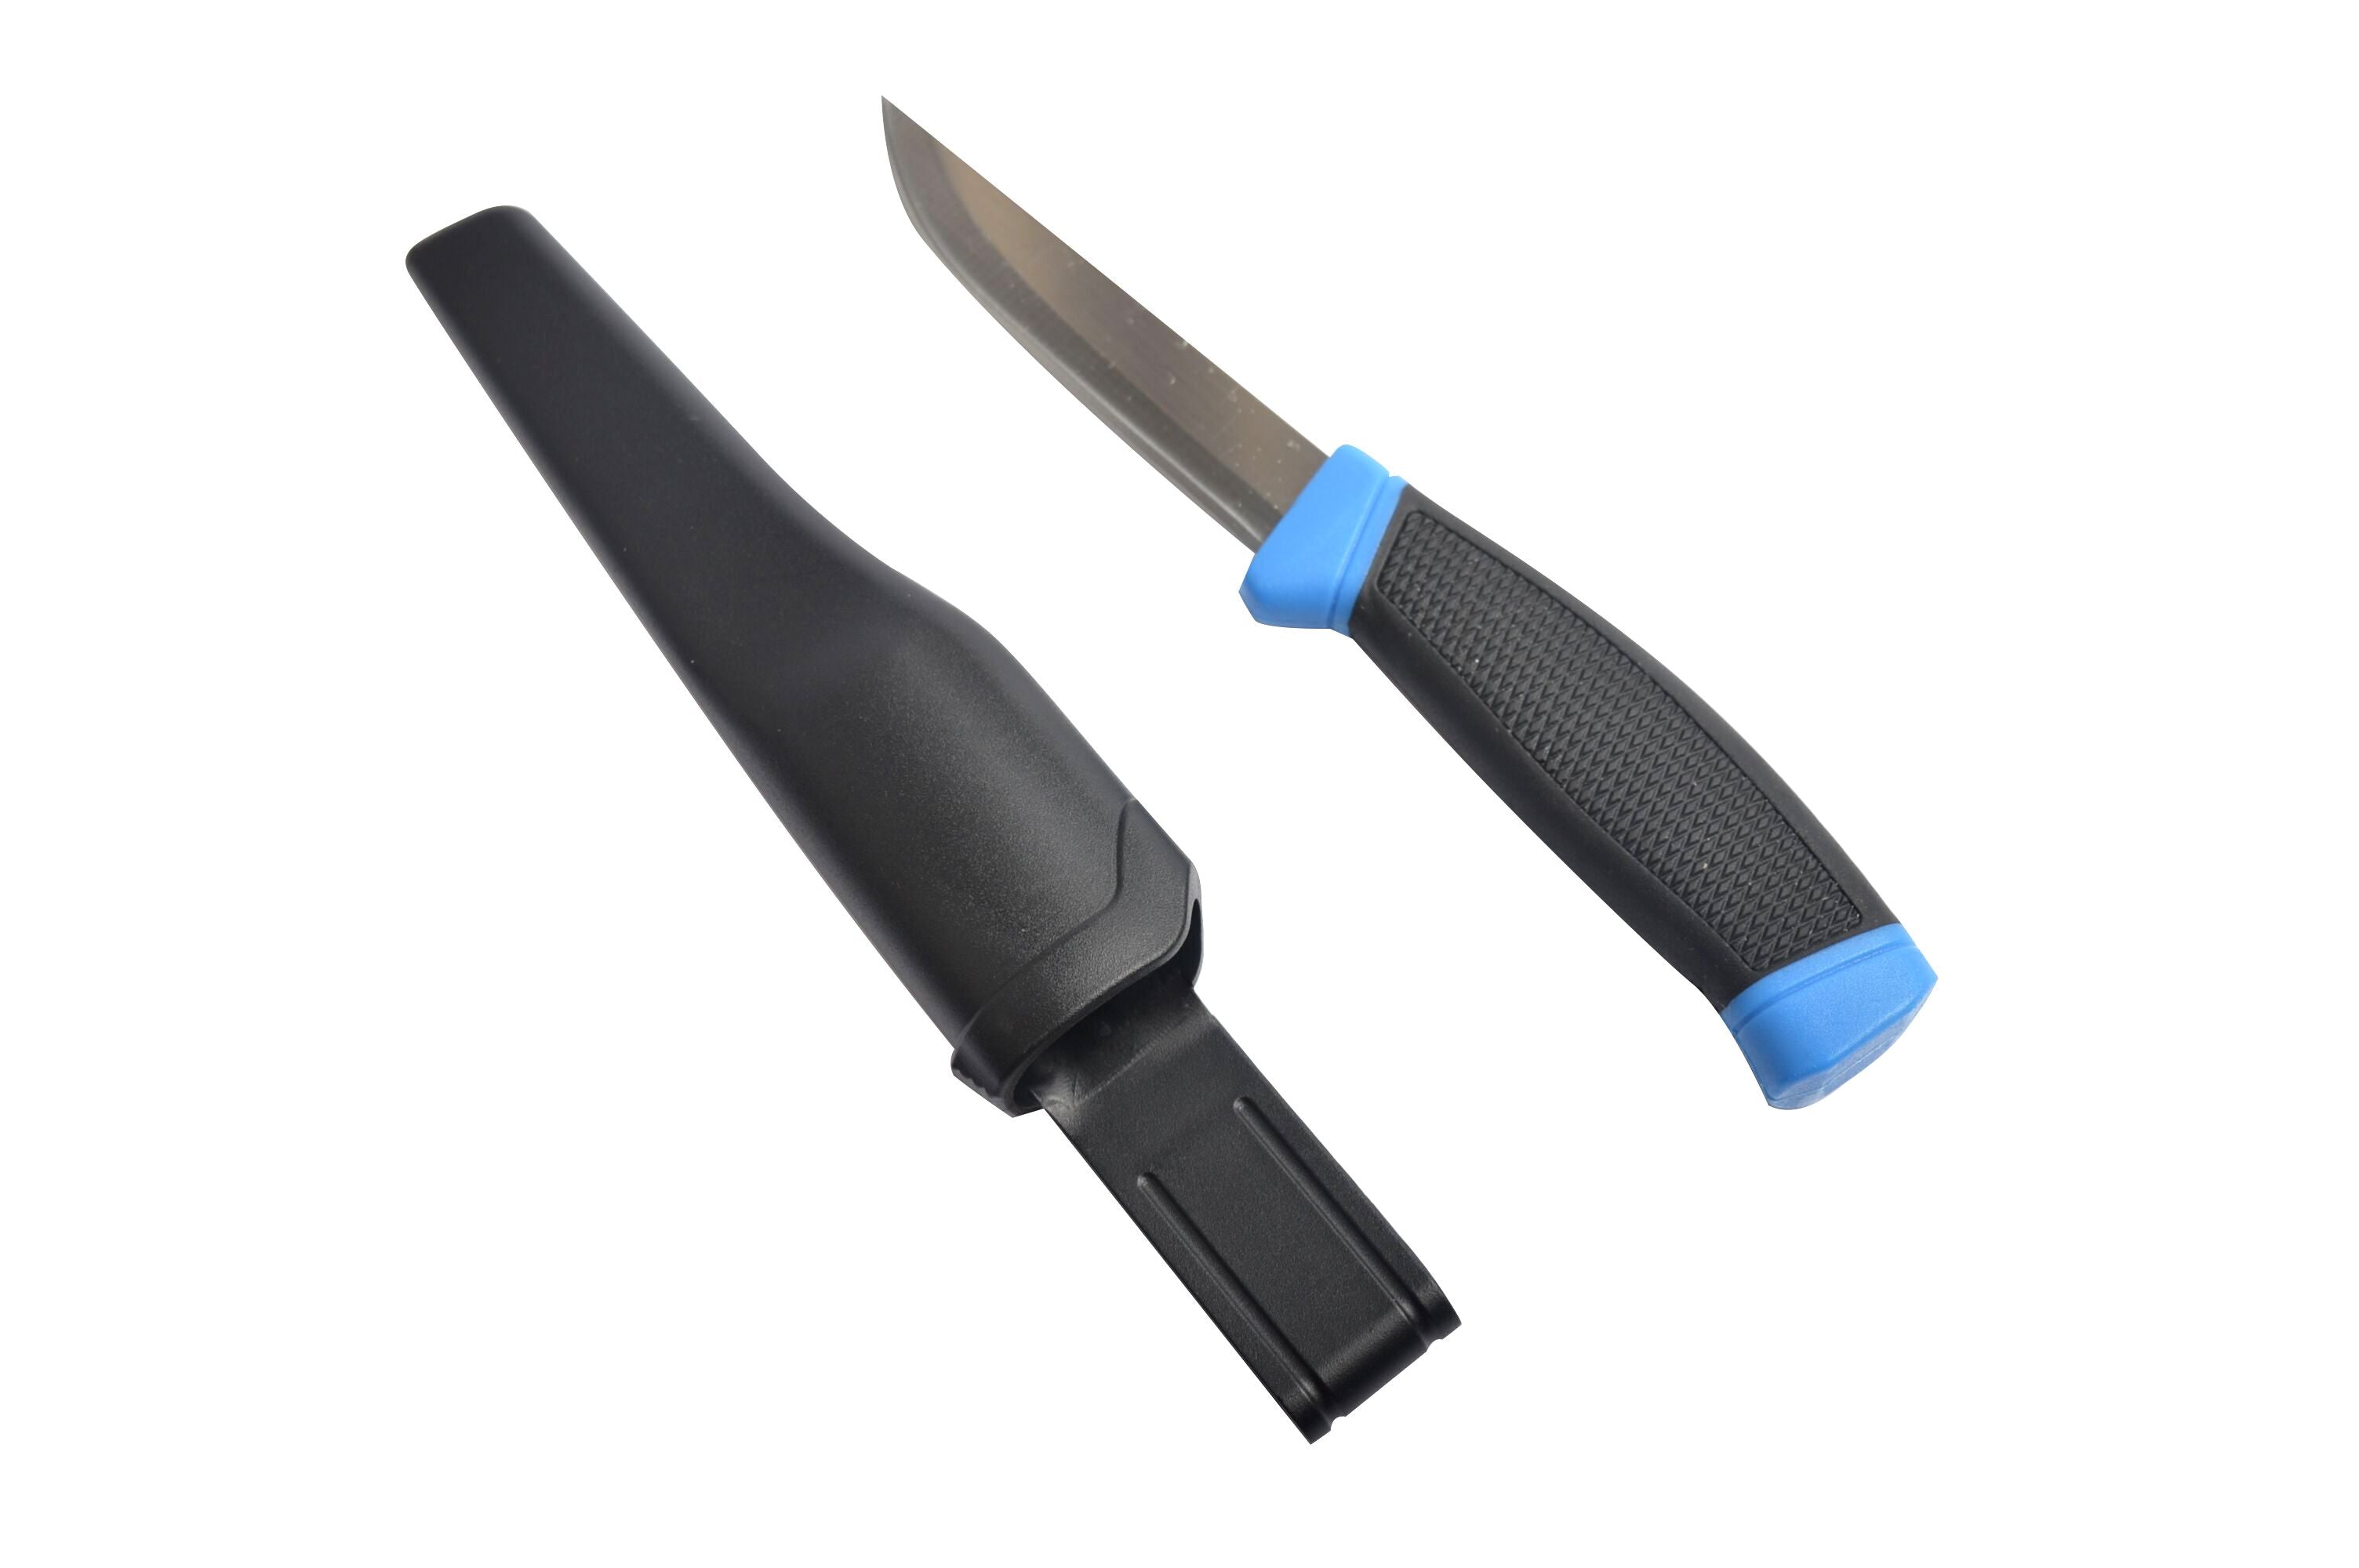 4 INCH BAIT KNIFE IN DOUBLE BLISTER WITH SAFETY SHEATH